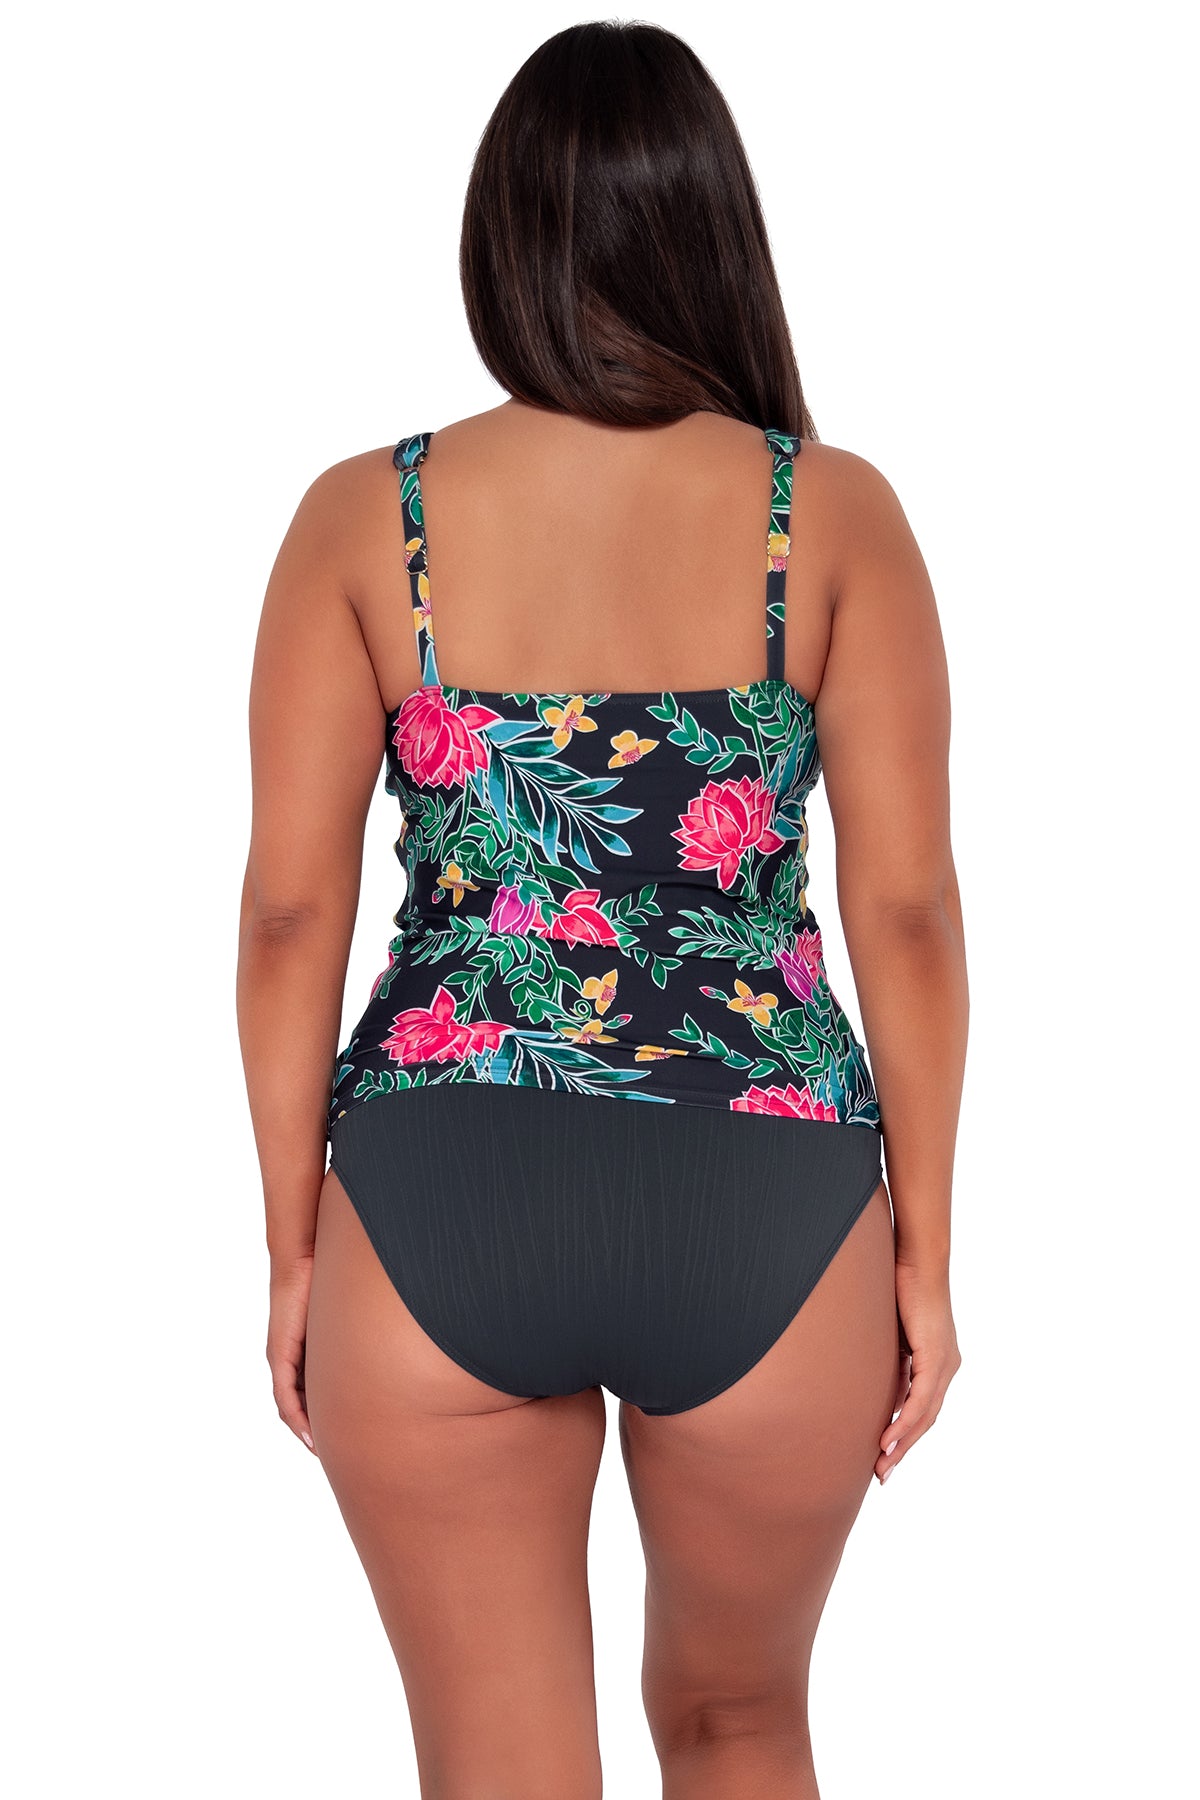 pose #1 of Nicki wearing Sunsets Escape Twilight Blooms Emerson Tankini Top